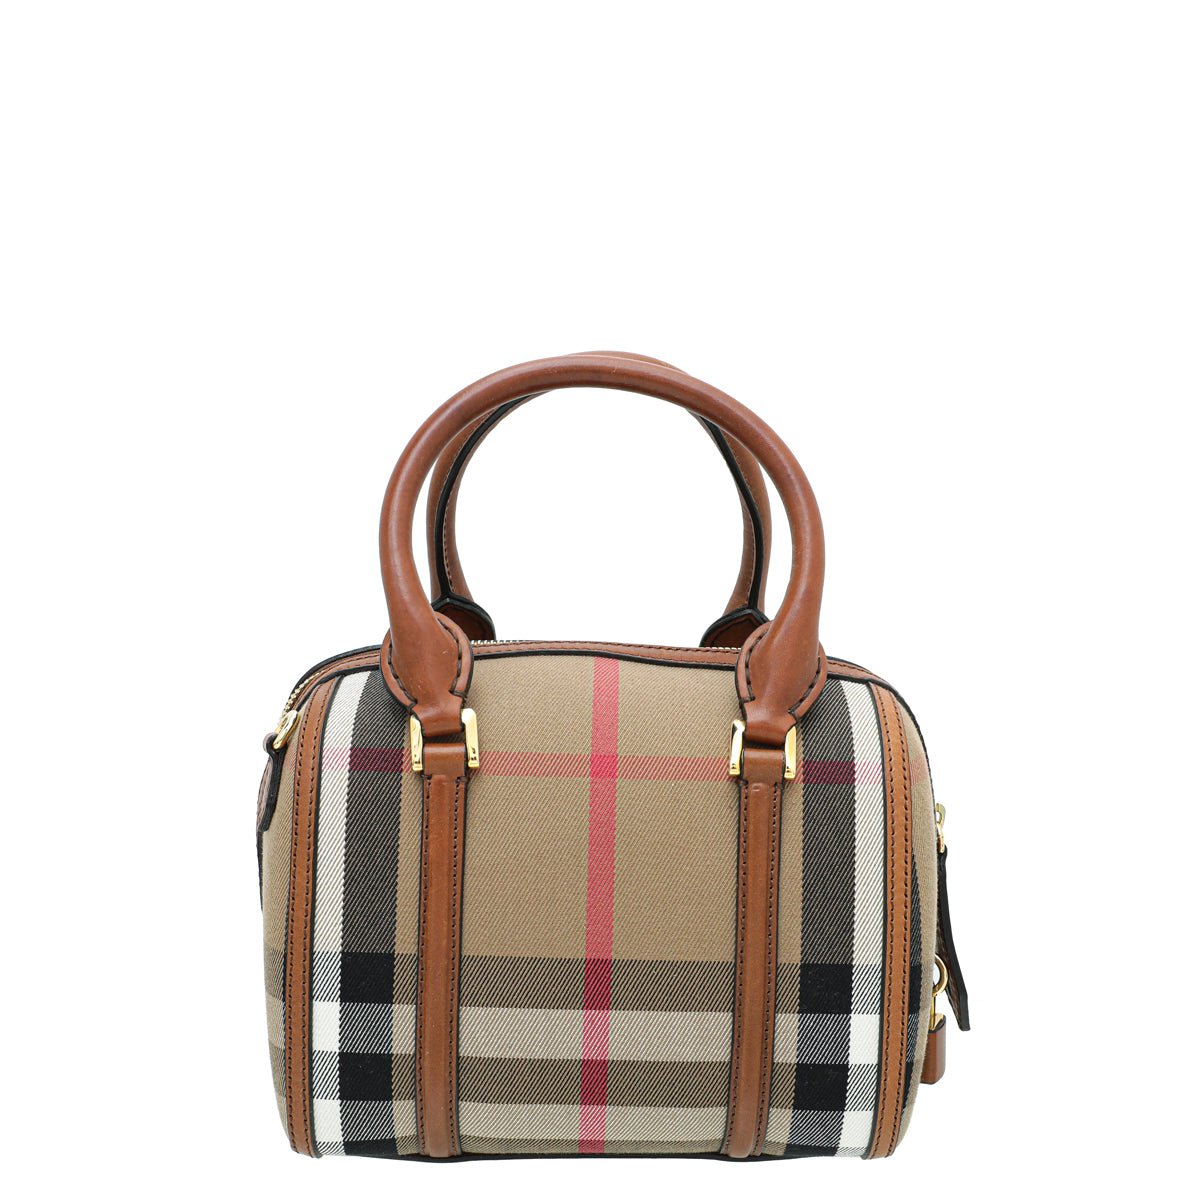 Burberry - Burberry Brown House Check Bridle Small Alchester Bowling Bag | The Closet